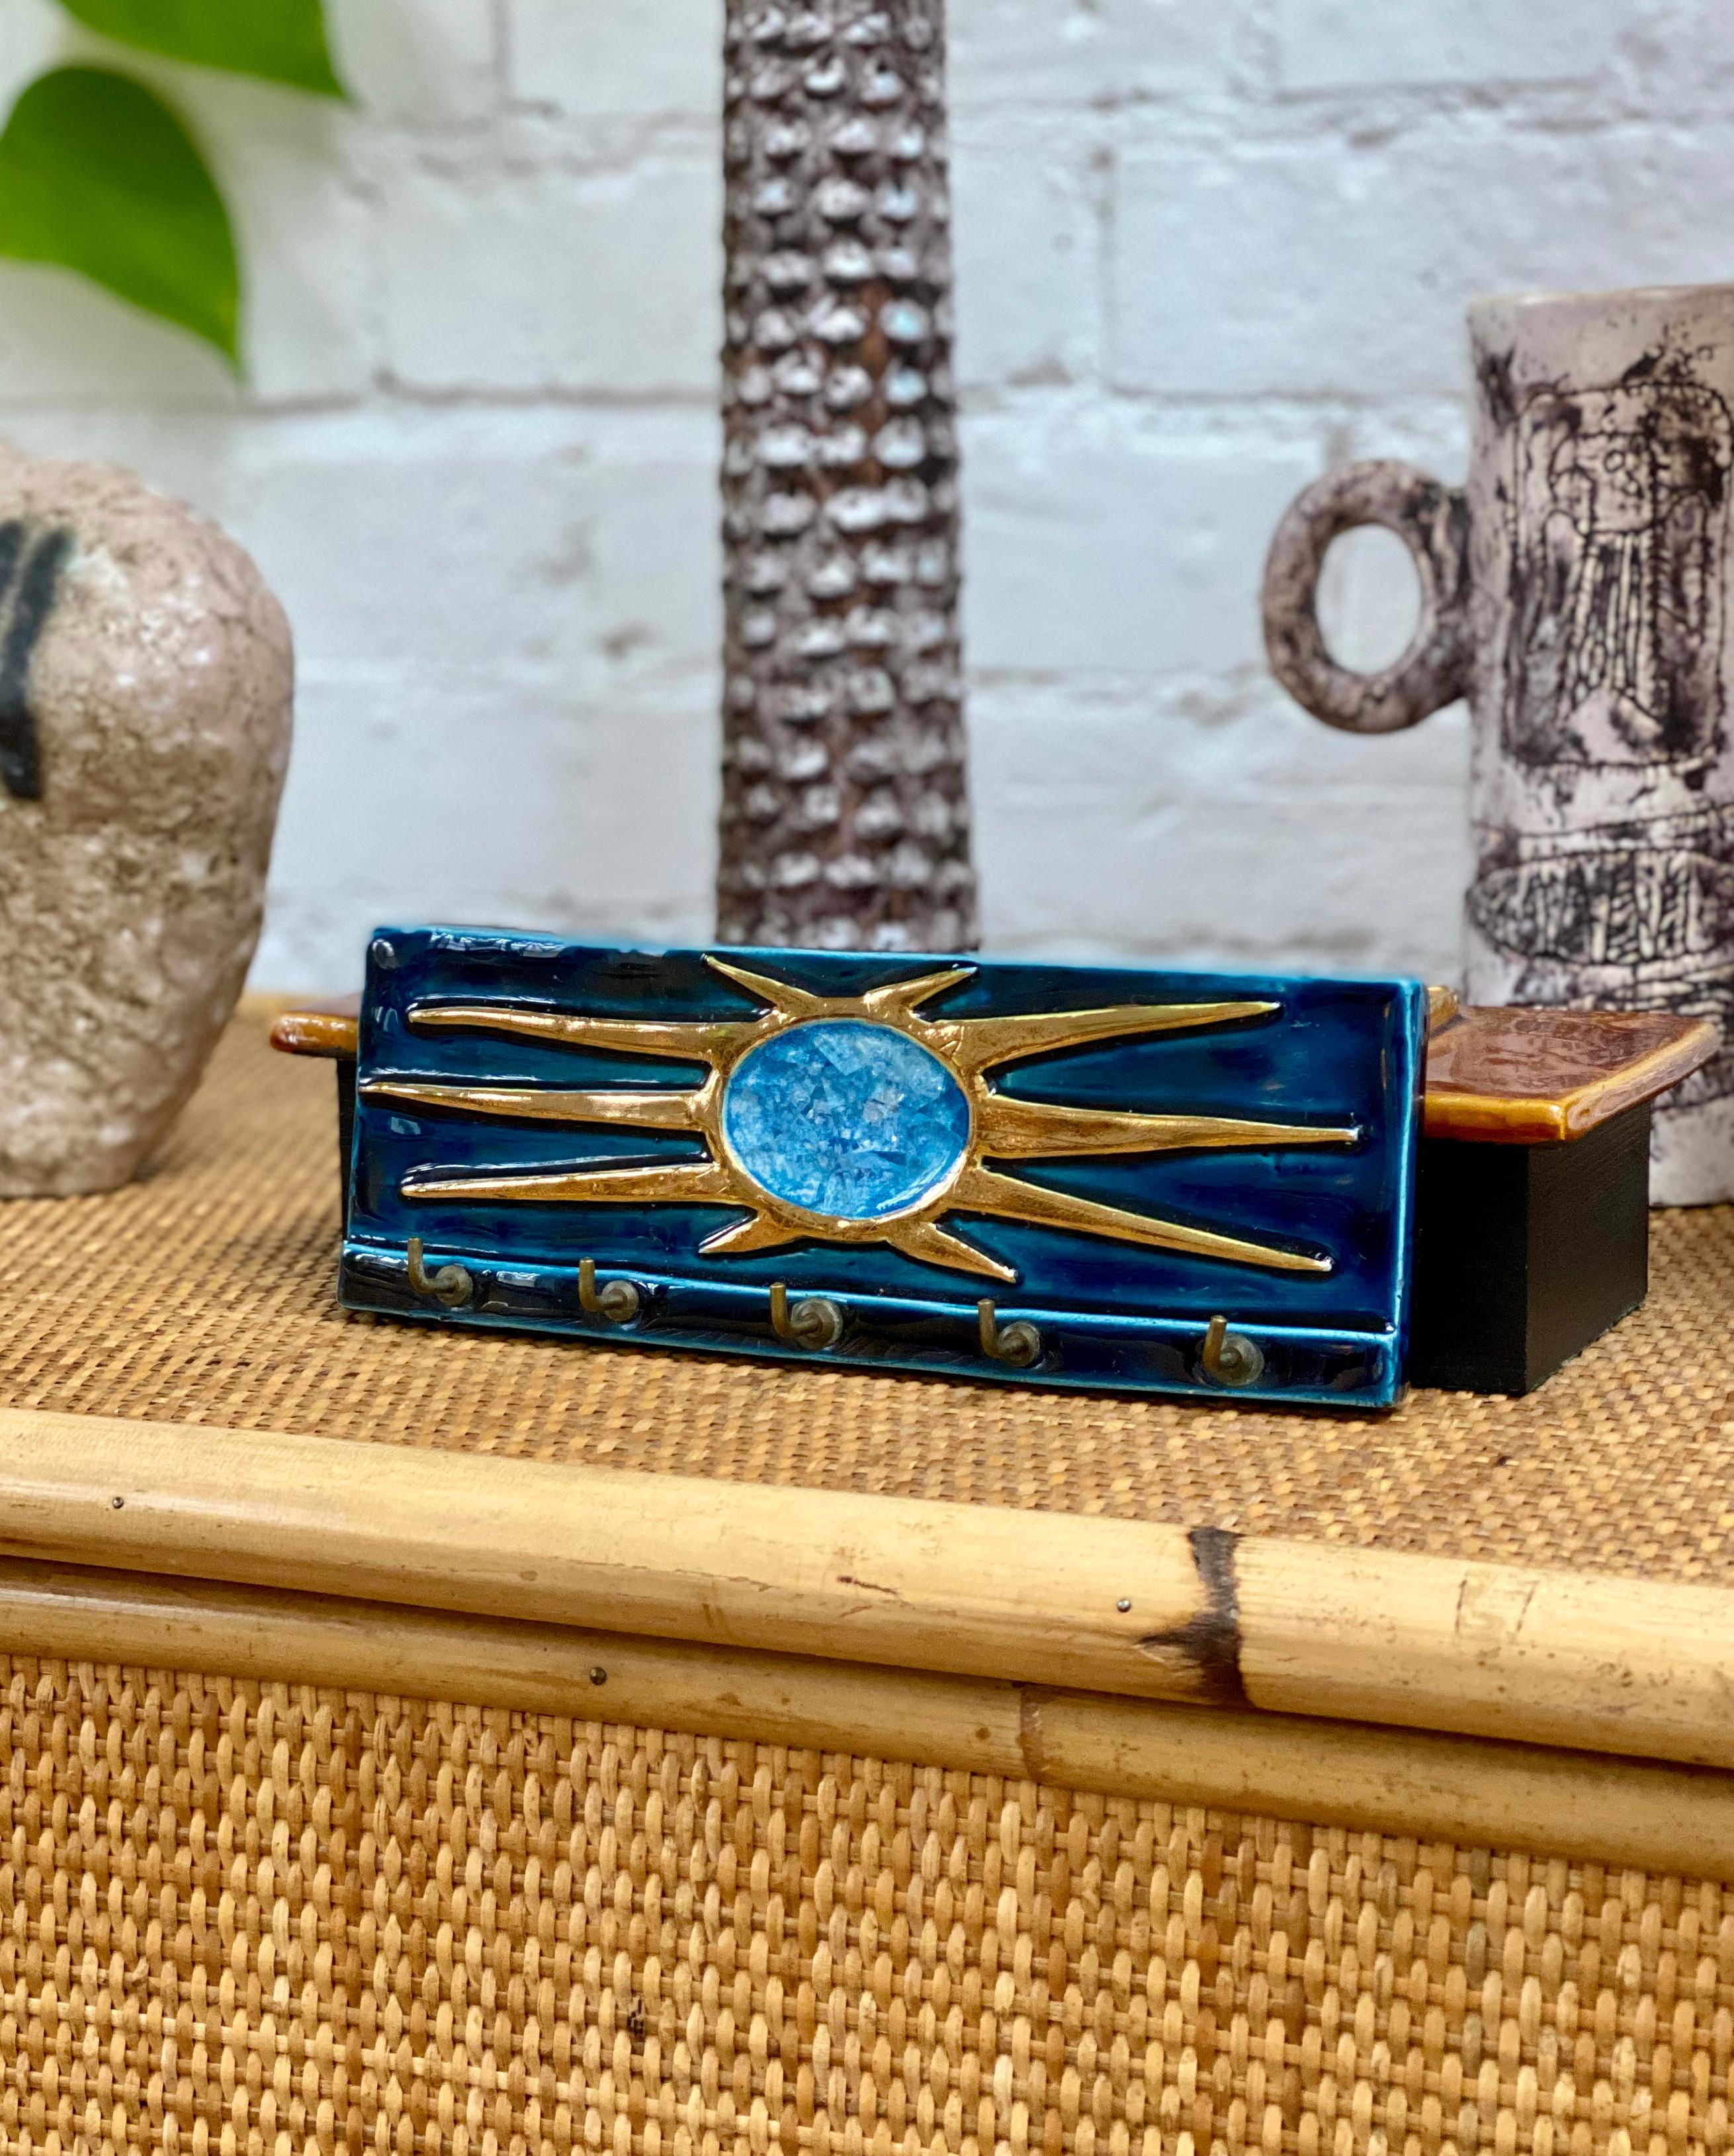 A delightful, decorative midcentury French key or accessory holder in a lustrous, azure blue enamel base, topped by a decorated sun motif in gold crackle with cut fragments of colorful enameled glass in the centre. This piece is in good vintage